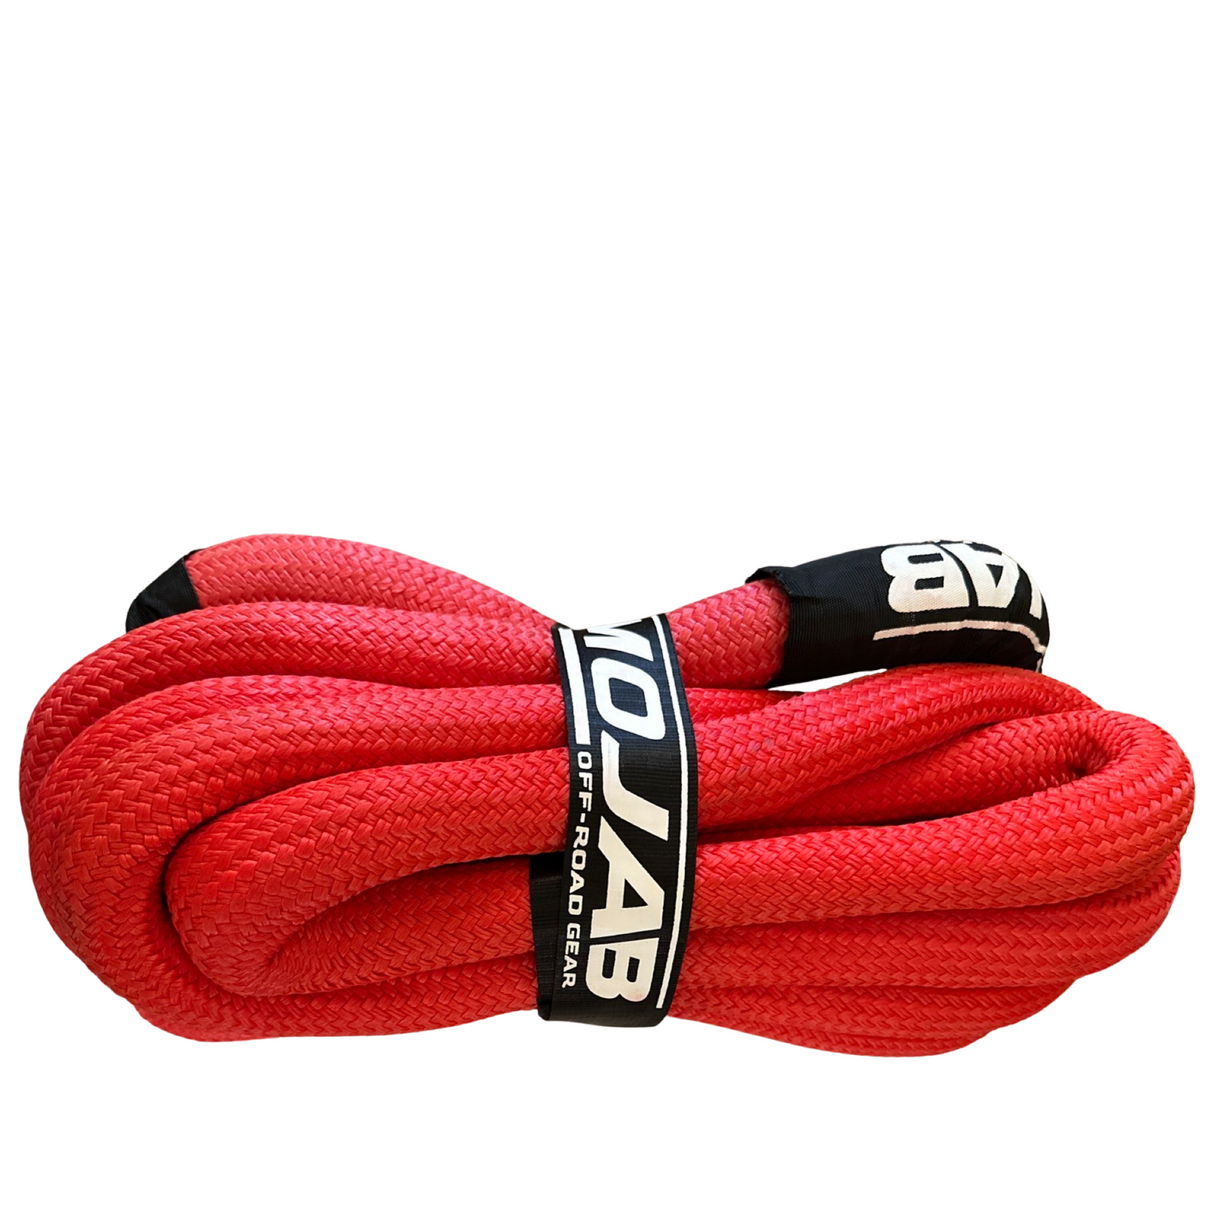 1 1/4'' x 30' Kinetic rope with storage bag.